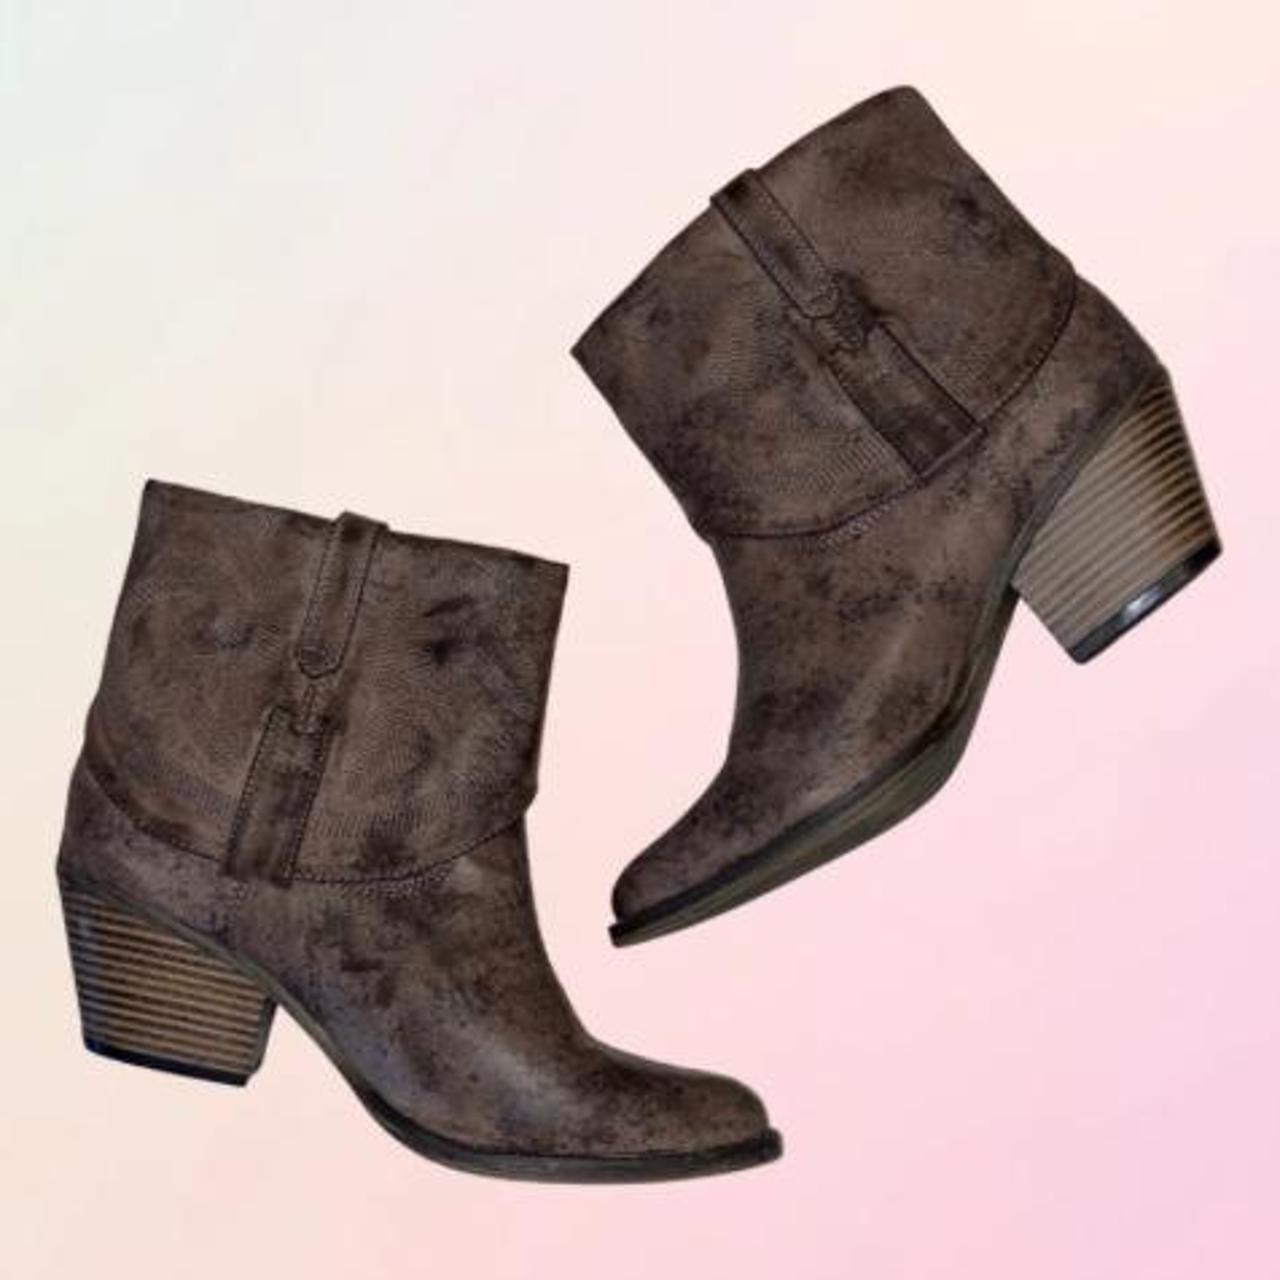 Product Image 1 - MIA, “Gambit” Western Foldover Ankle